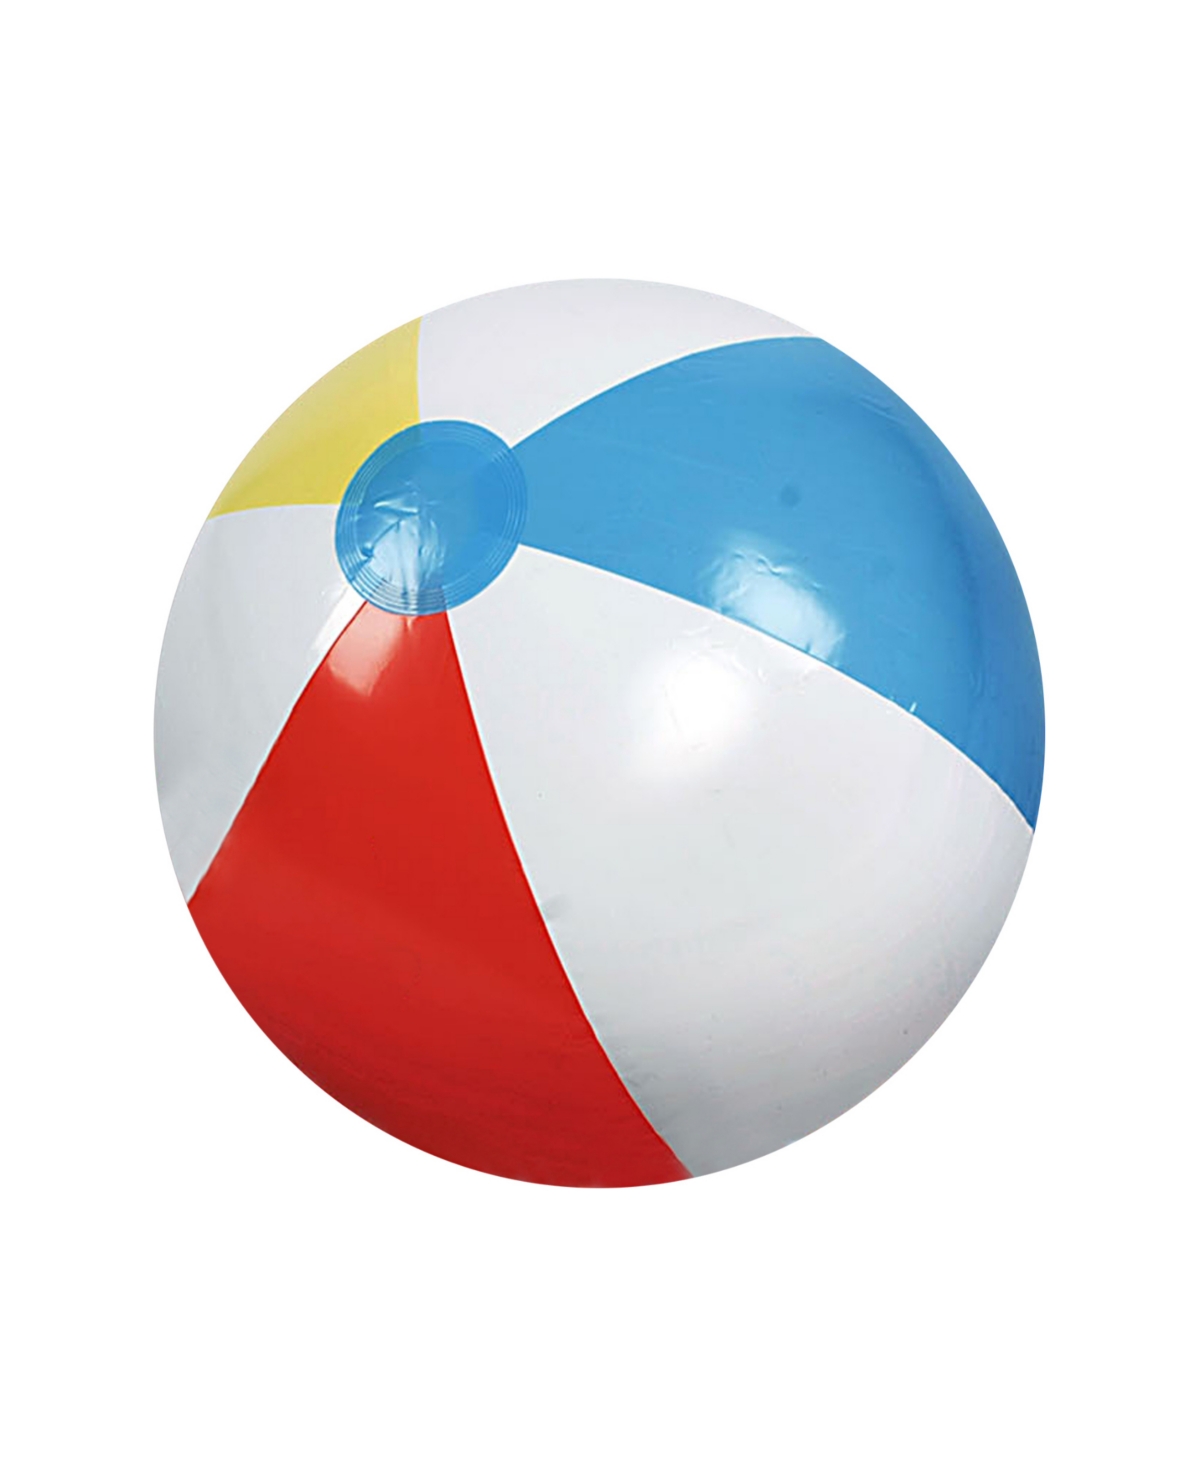 16" Multi-Color 6 Panel Inflatable Beach Ball - White